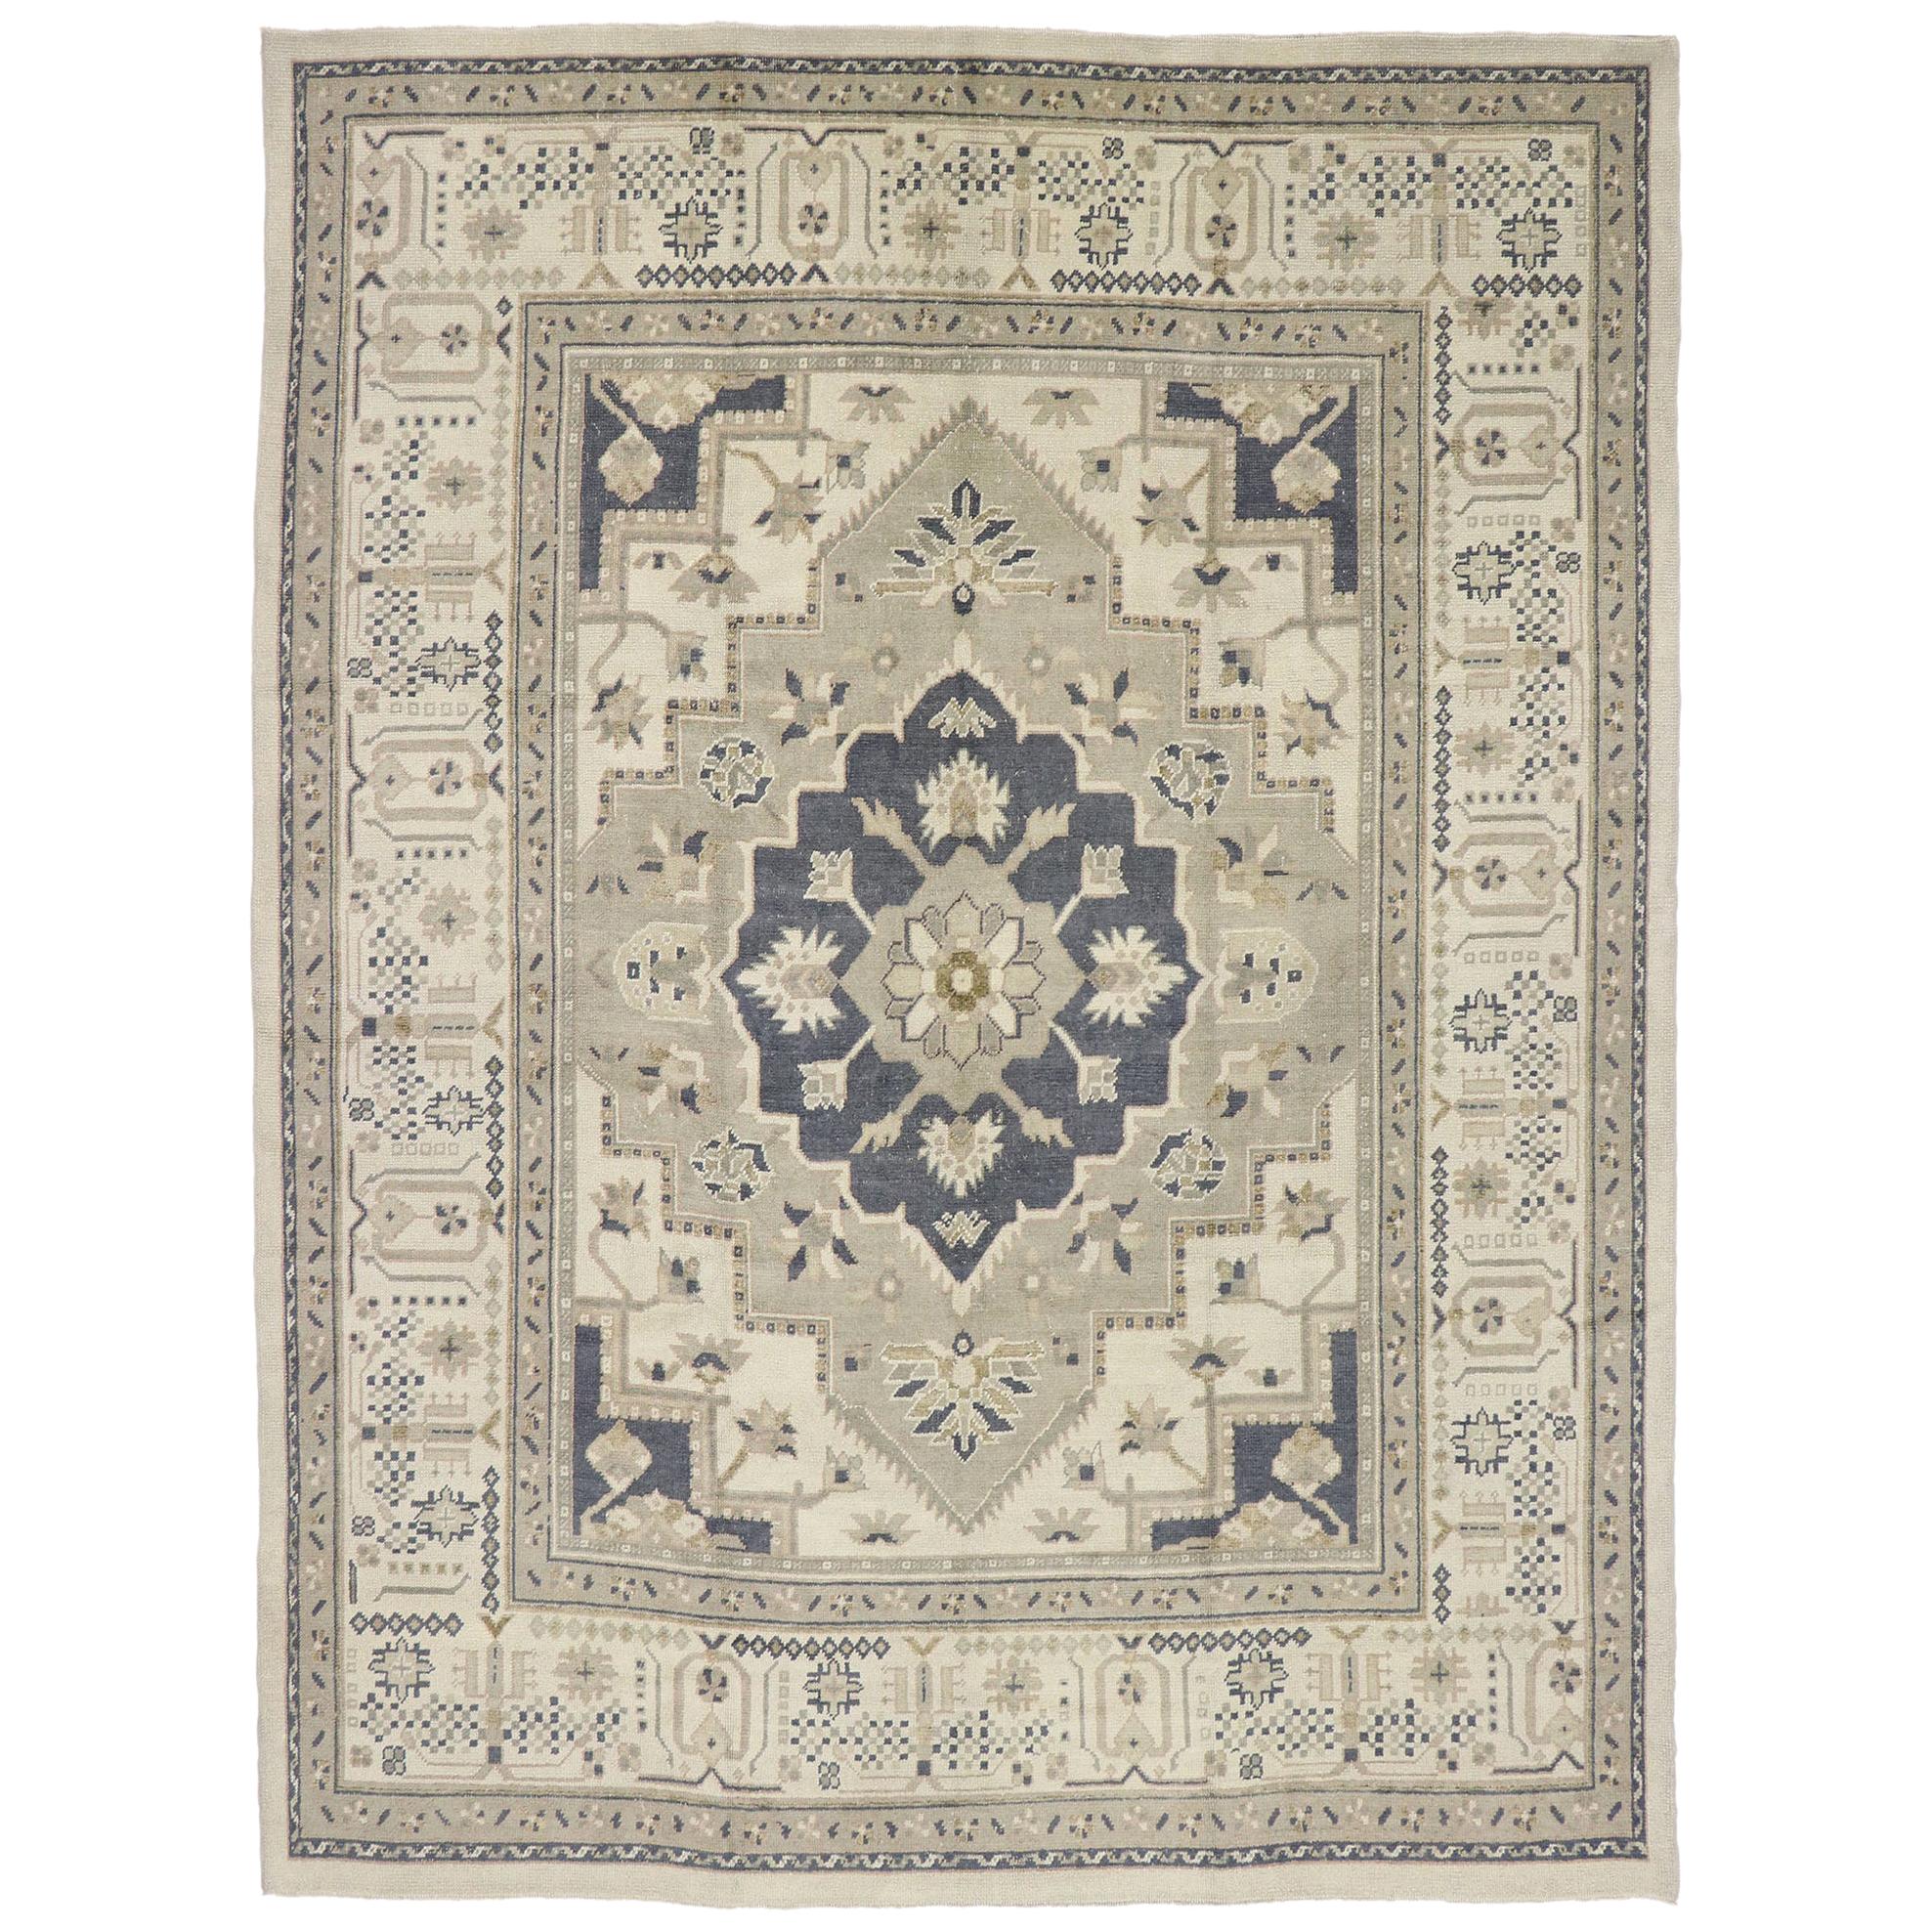 New Contemporary Turkish Oushak Rug with Modern Transitional Style